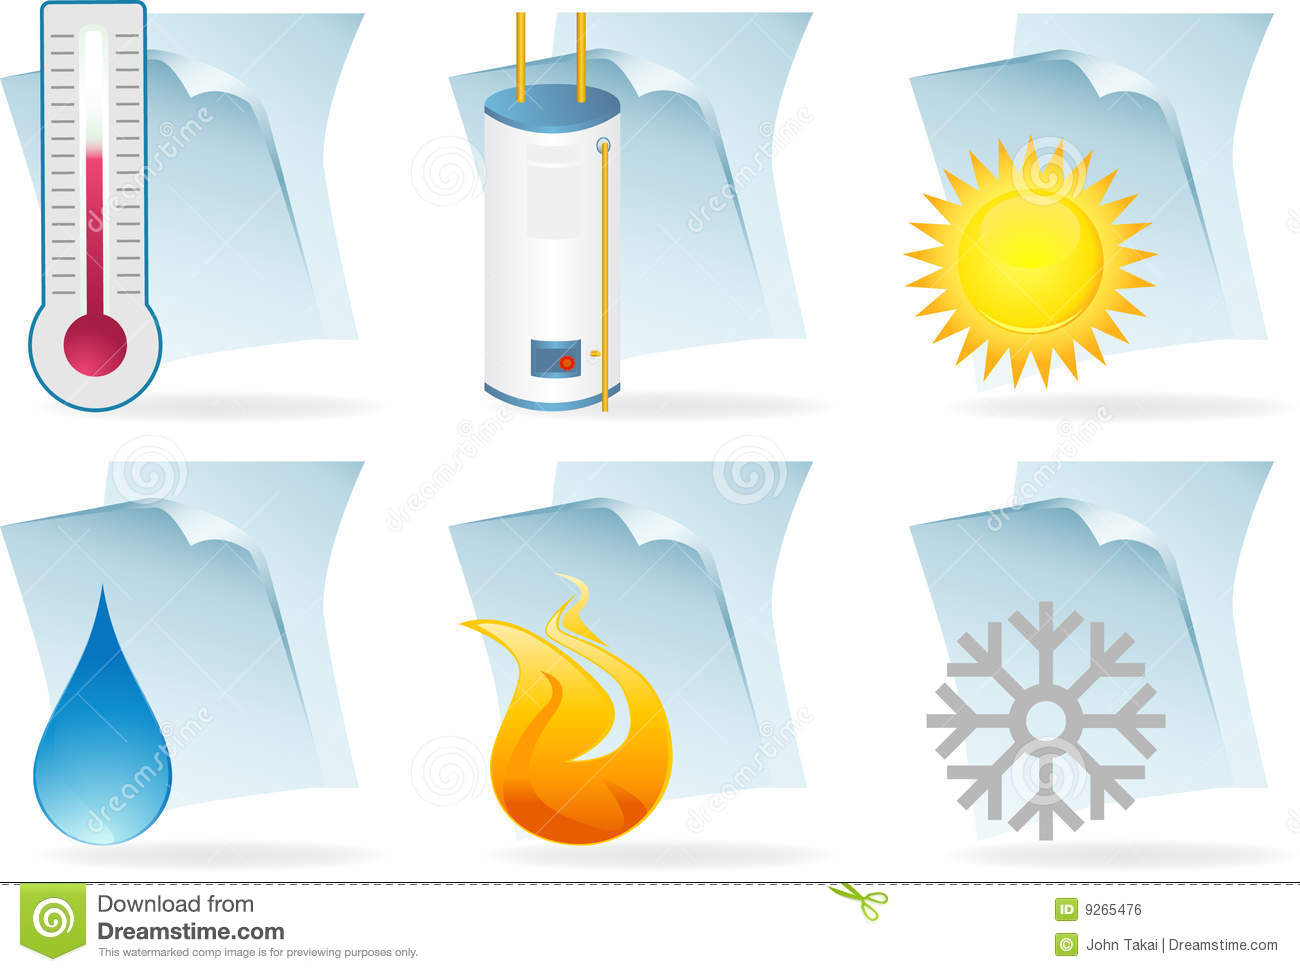 Water Heater Document Icons Royalty Free Stock Image   Image  9265476